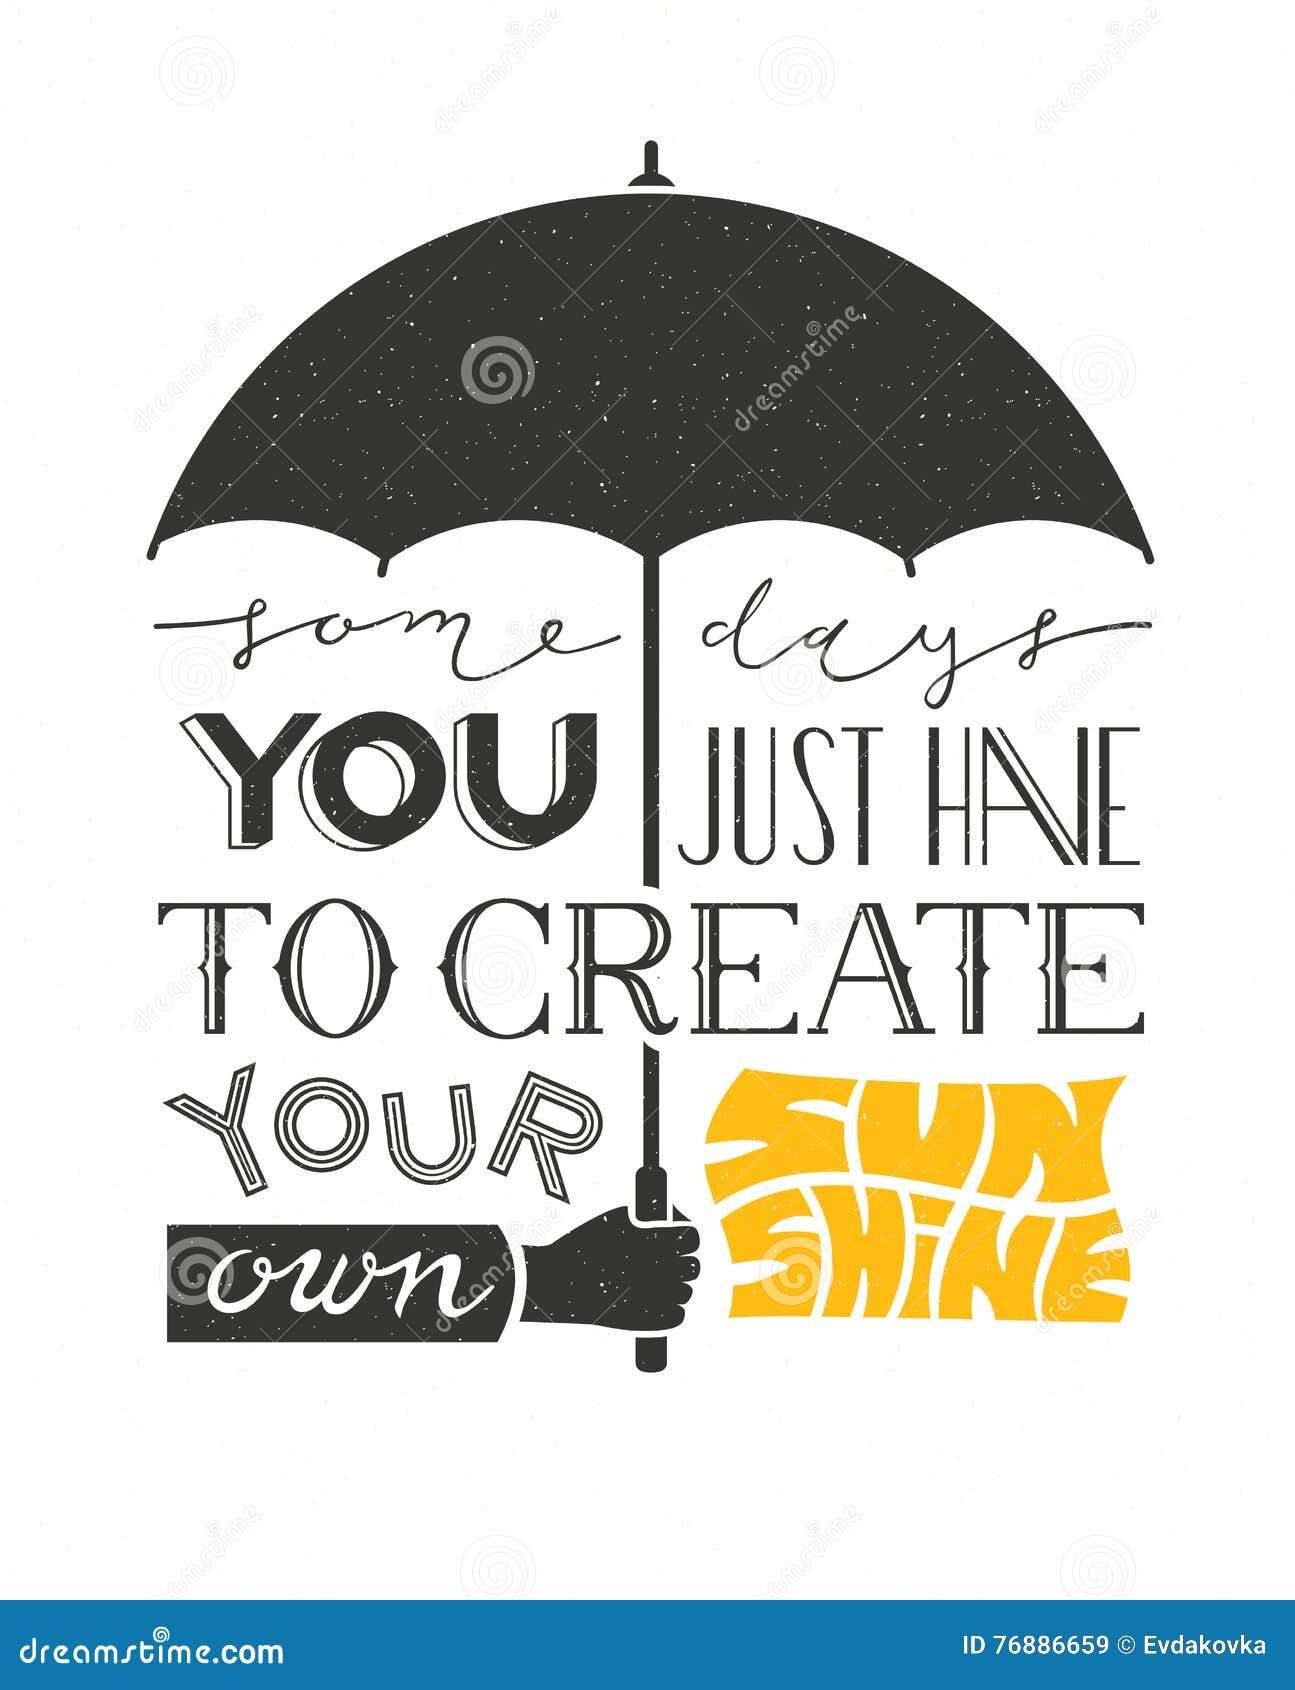 poster with hand holding umbrella and text lettering. typographic background motivation quote.